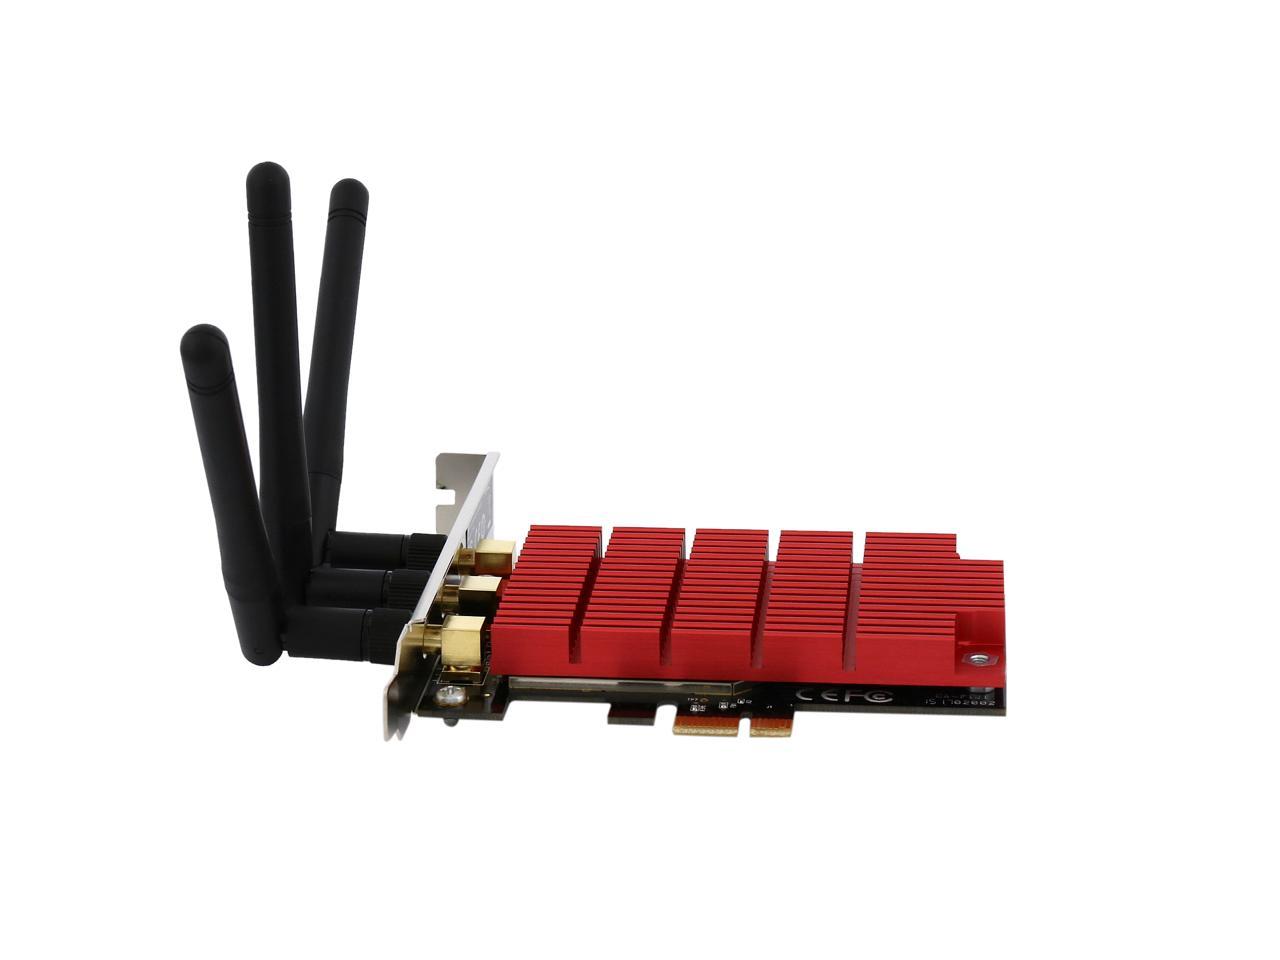 Rosewill RNX-AC1900PCE, Dual Band Wireless AC1900 Wi-Fi Adapter for